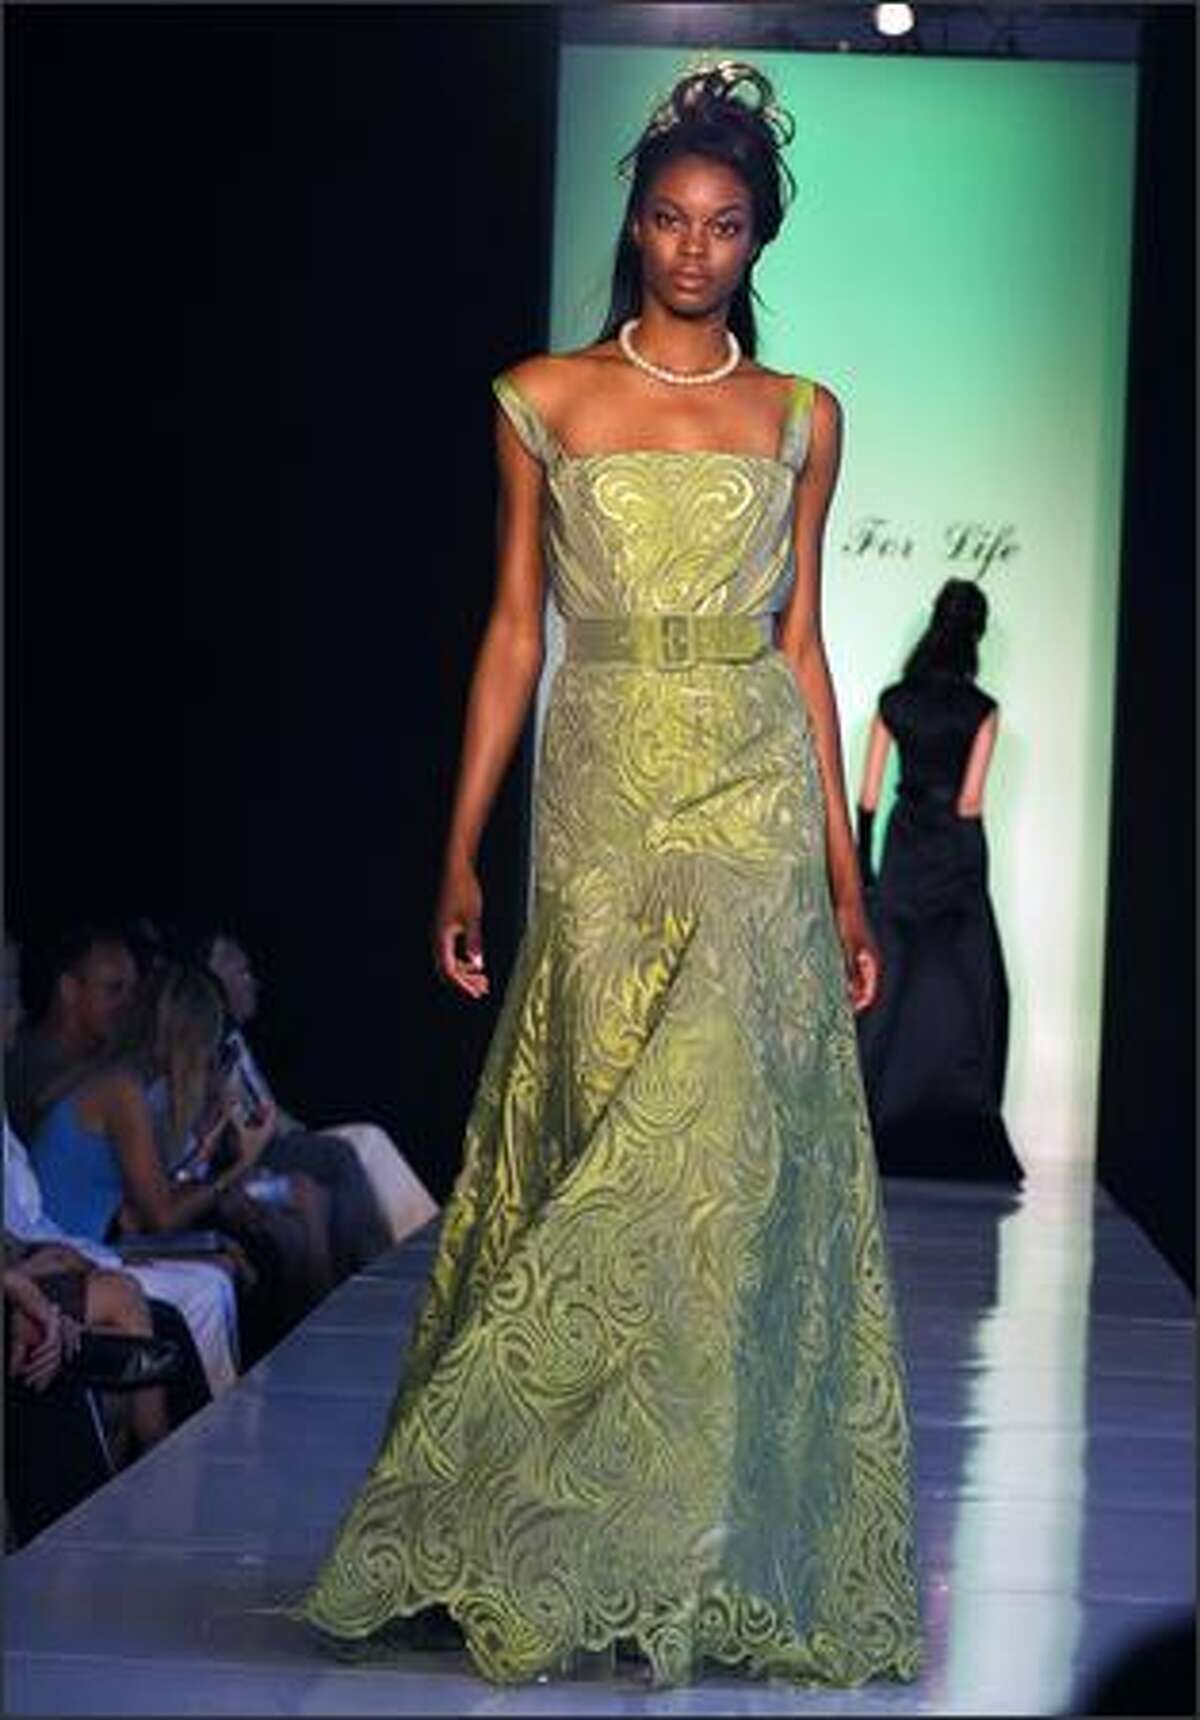 Kevan Hall designs are displayed at Fashion for Life presented by The Friendly House on Monday in Los Angeles, Calif.